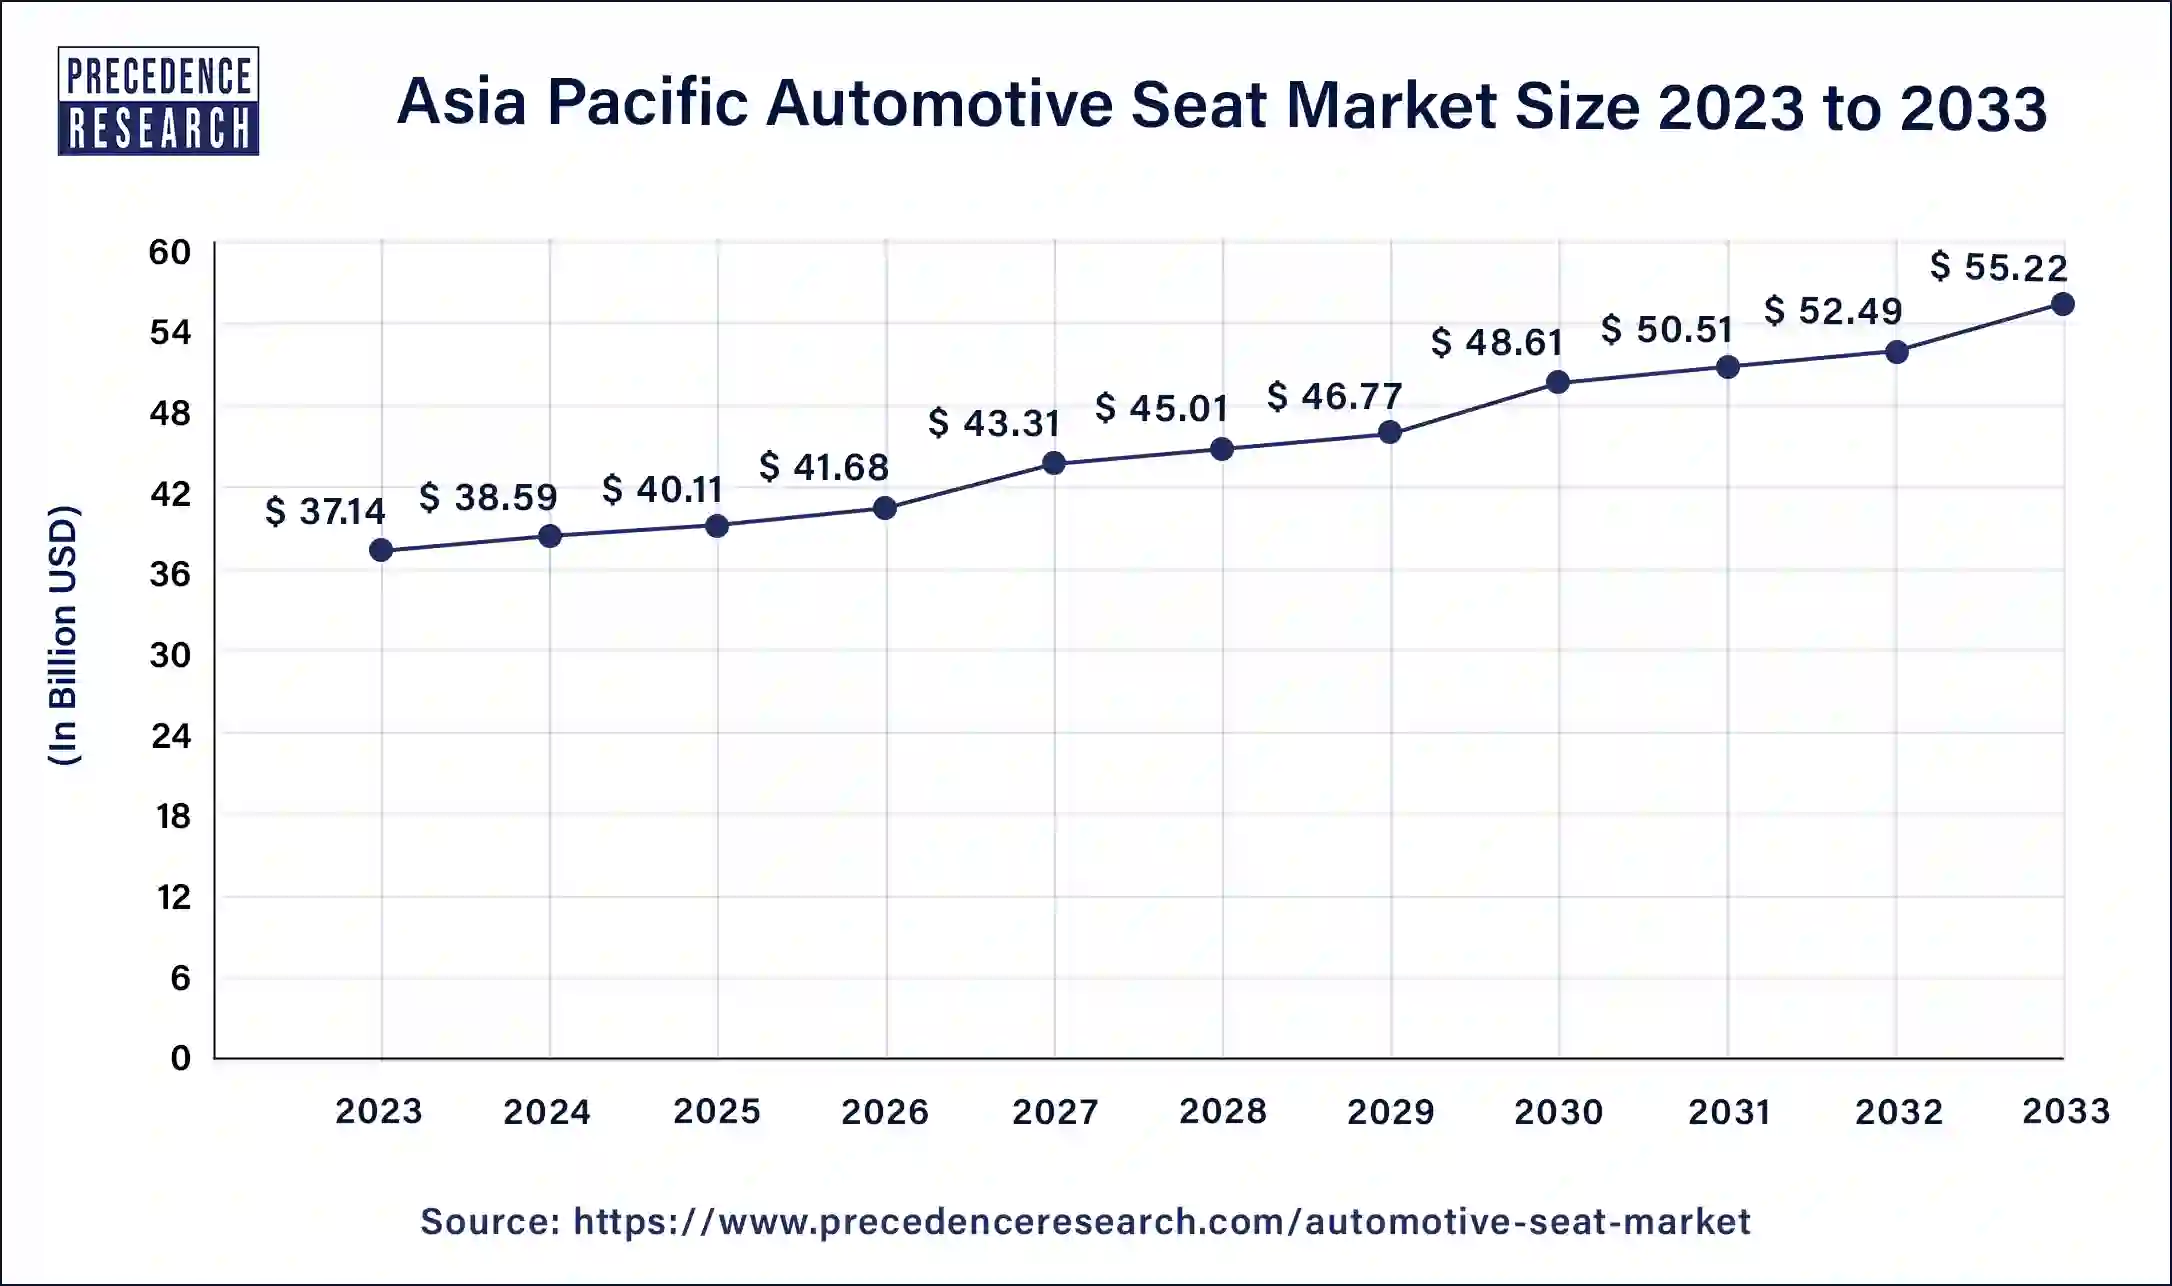 Asia Pacific Automotive Seat Market Size 2023 to 2033